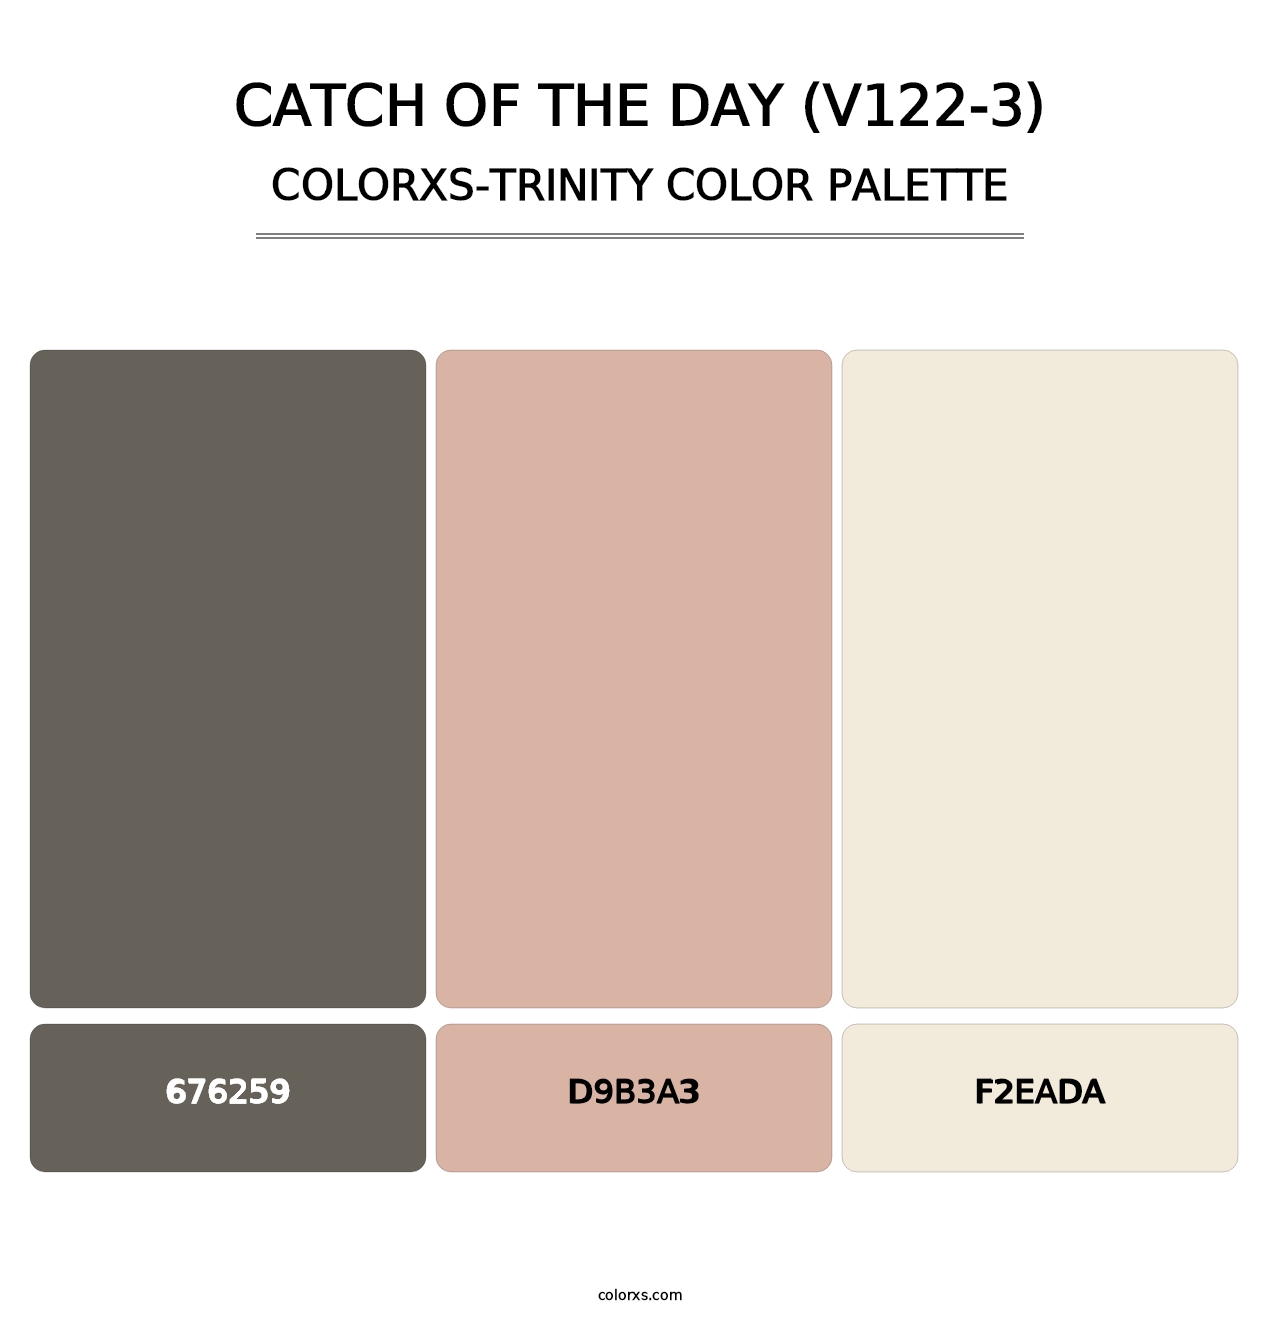 Catch of the Day (V122-3) - Colorxs Trinity Palette